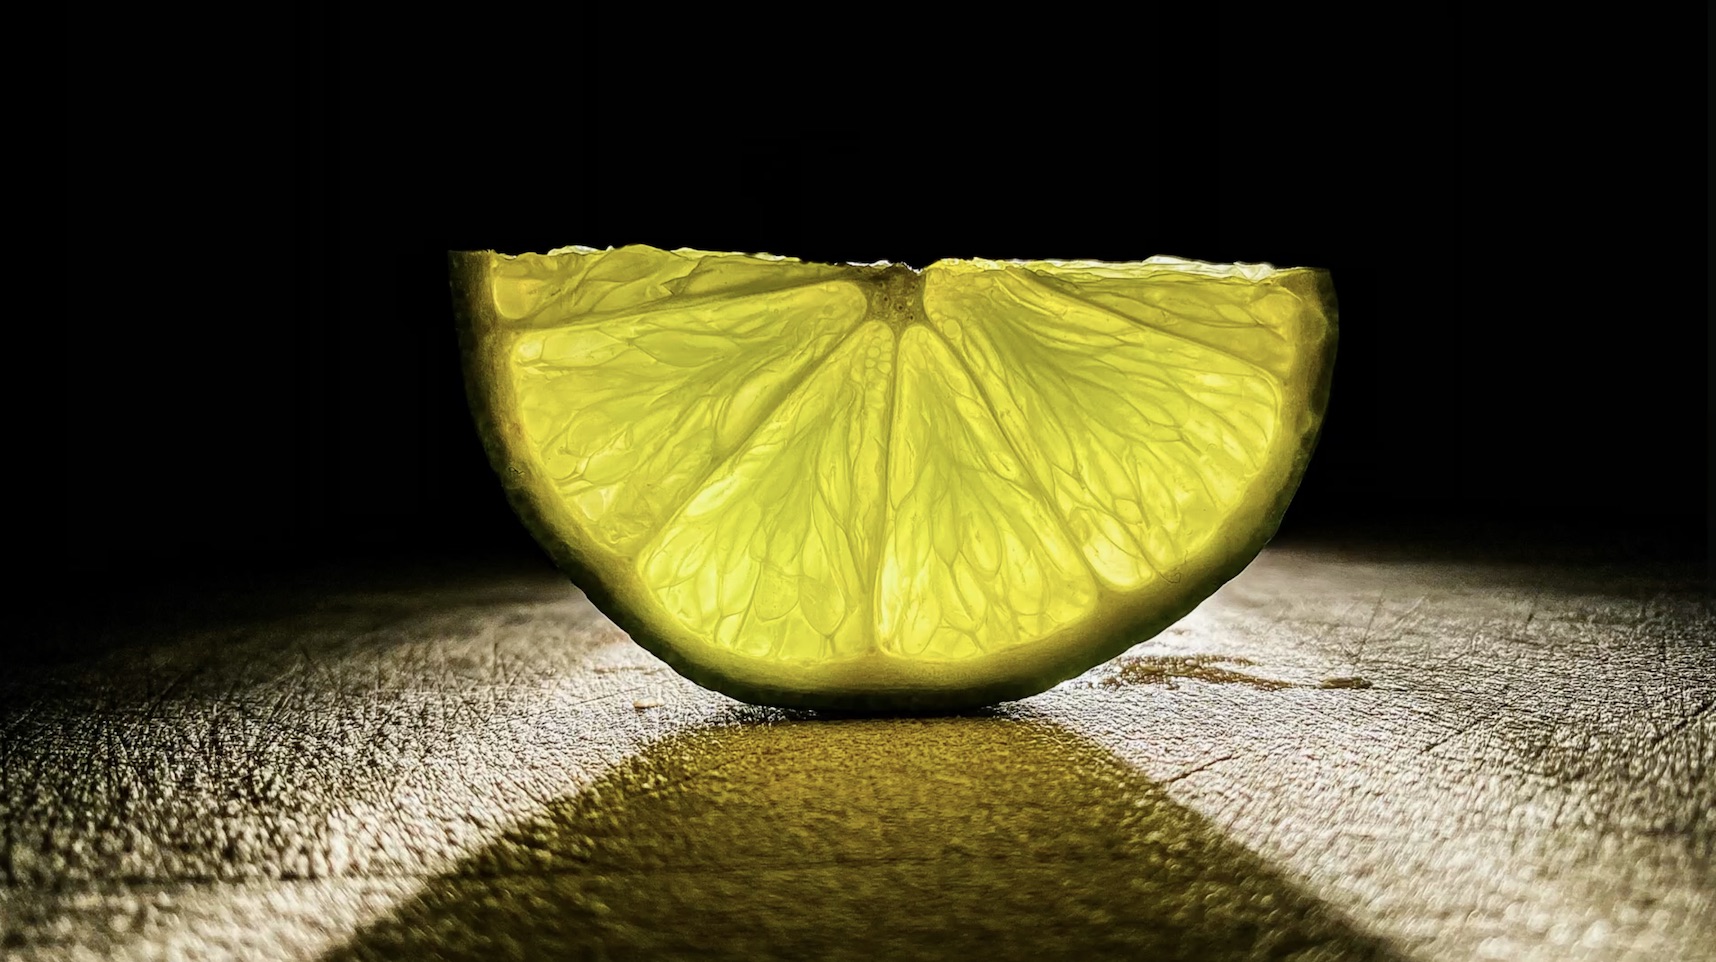 Lime picture with a variety of depth clues